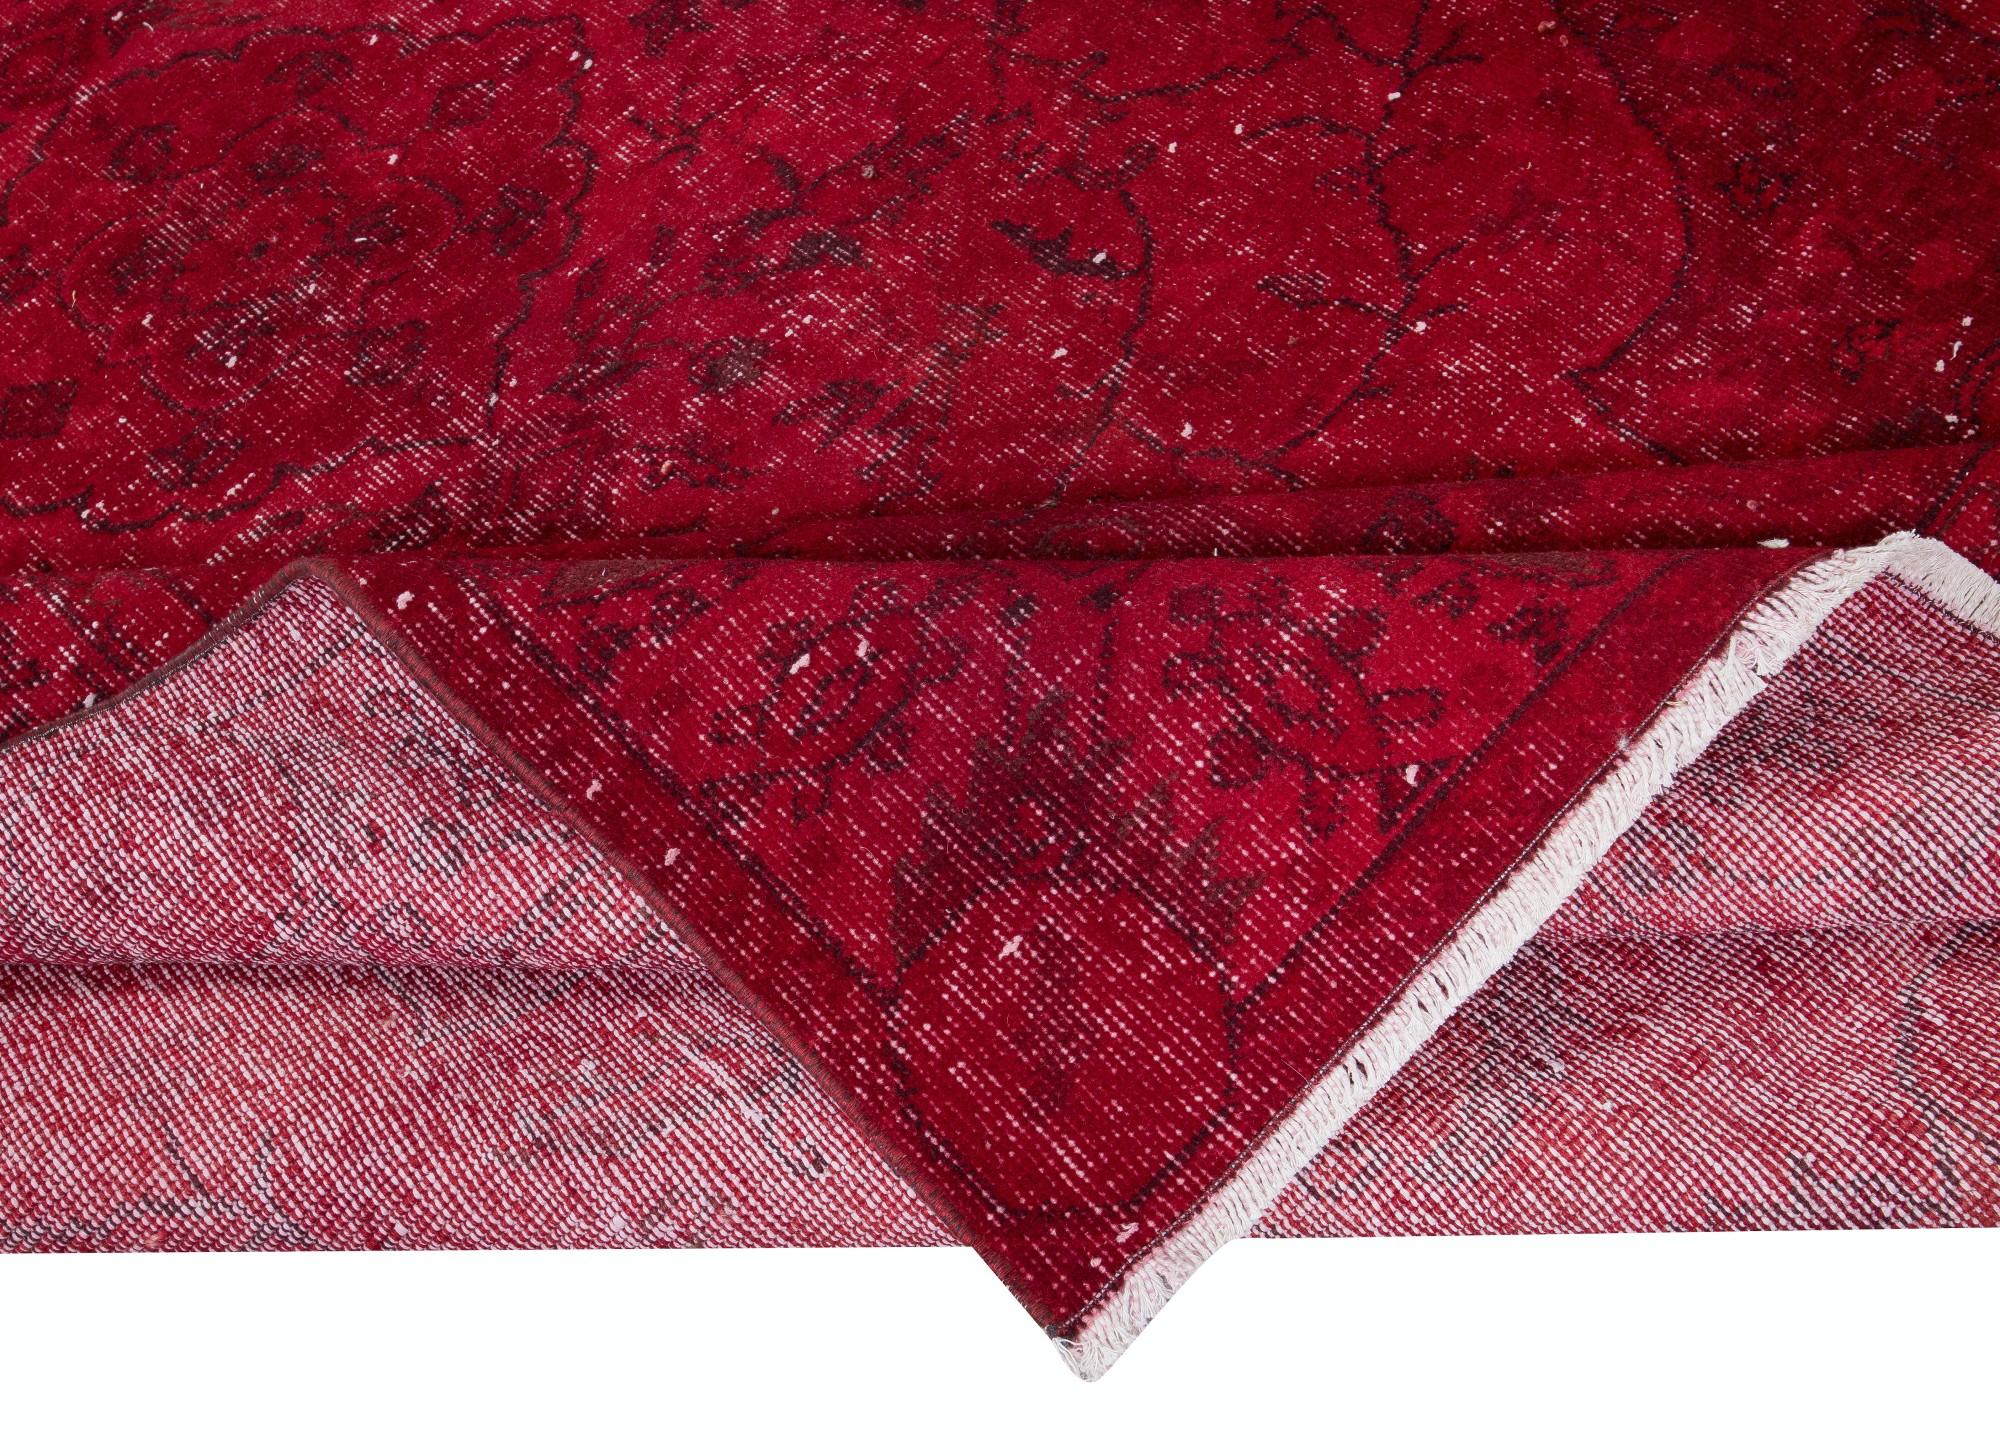 Modern 6x9.8 Ft One-of-a-Kind Red Wool Area Rug, Room Size Handmade Turkish Carpet For Sale